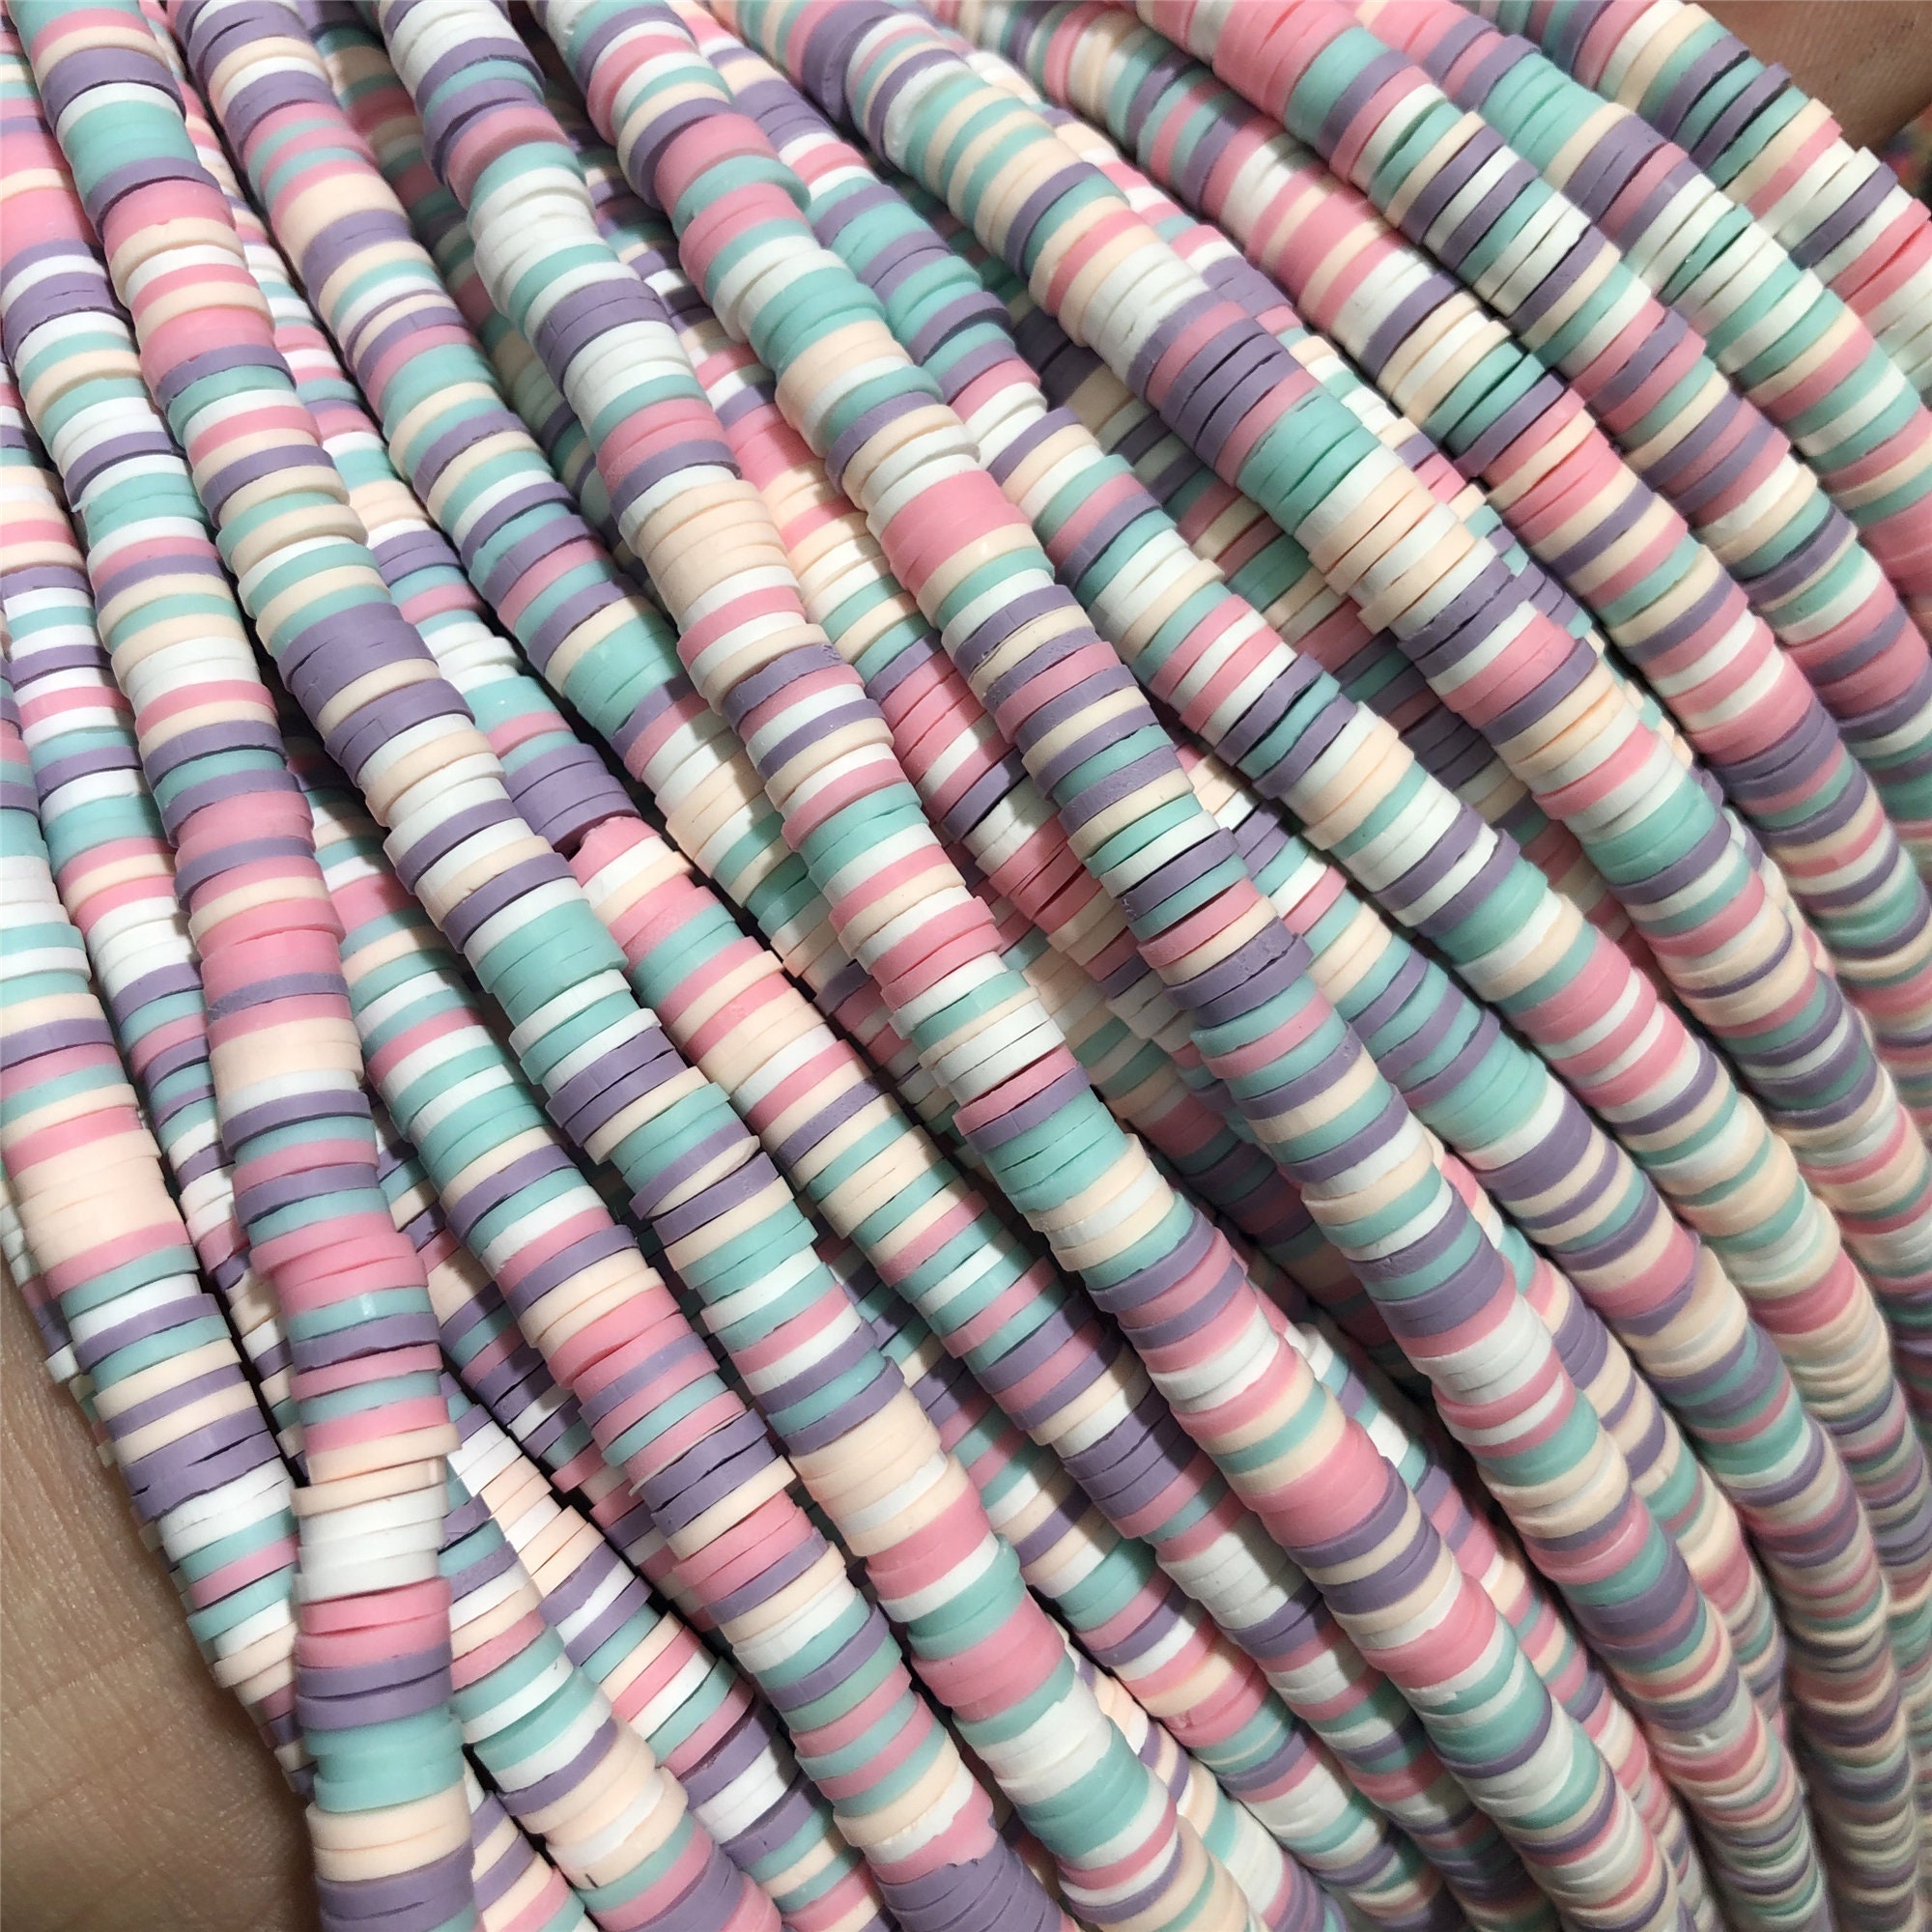 2 Strands, 16, Vinly Beads, Bulk Polymer Beads, Polymer Clay Beads, Heishi  Beads, 5mm Round Rondelle Disc Beads for Bracelet, Necklace 